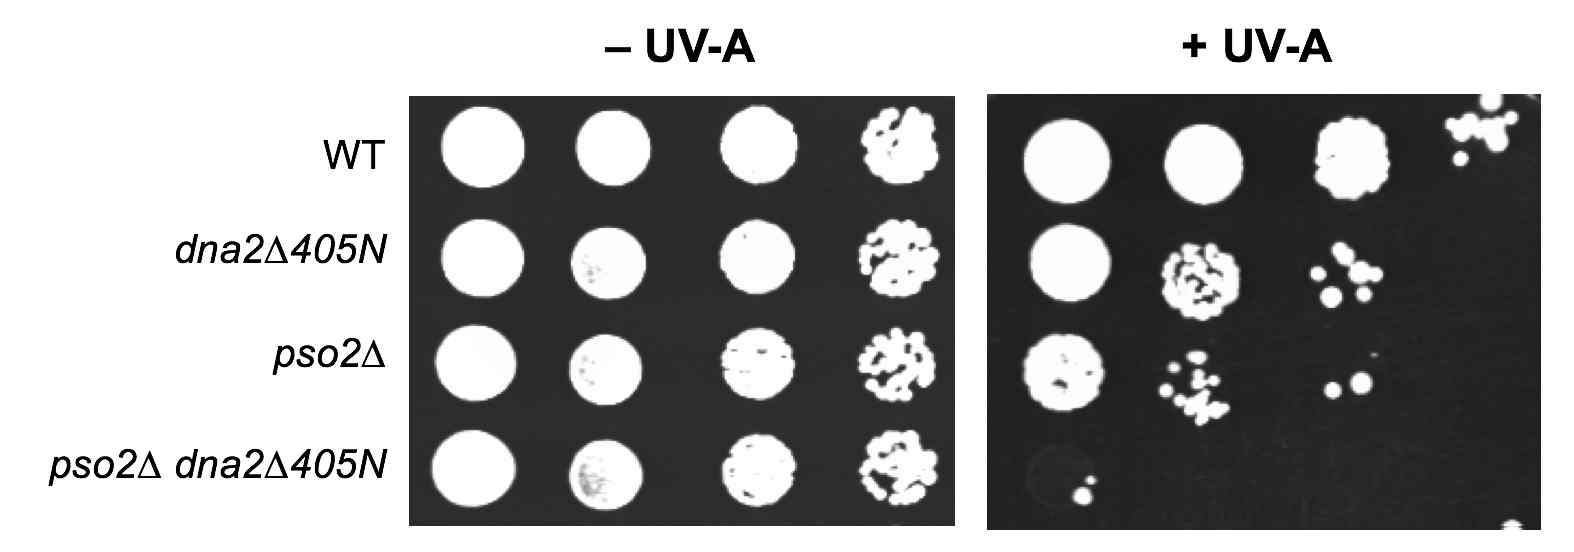 Synergistic sensitivity of dna2∆405 and pso2∆ to an interstrand-crosslinking agent. Cells were grown overnight in YPD and the cells were spotted in 10-fold dilutions (105, 104, 103, and 102 cells) onto YPD plates containing 8-methoxypsoralen (8-MOP, 0.1μg/ml). Plates were then exposed to UV-A, followed by incubation for 3 days at 25℃